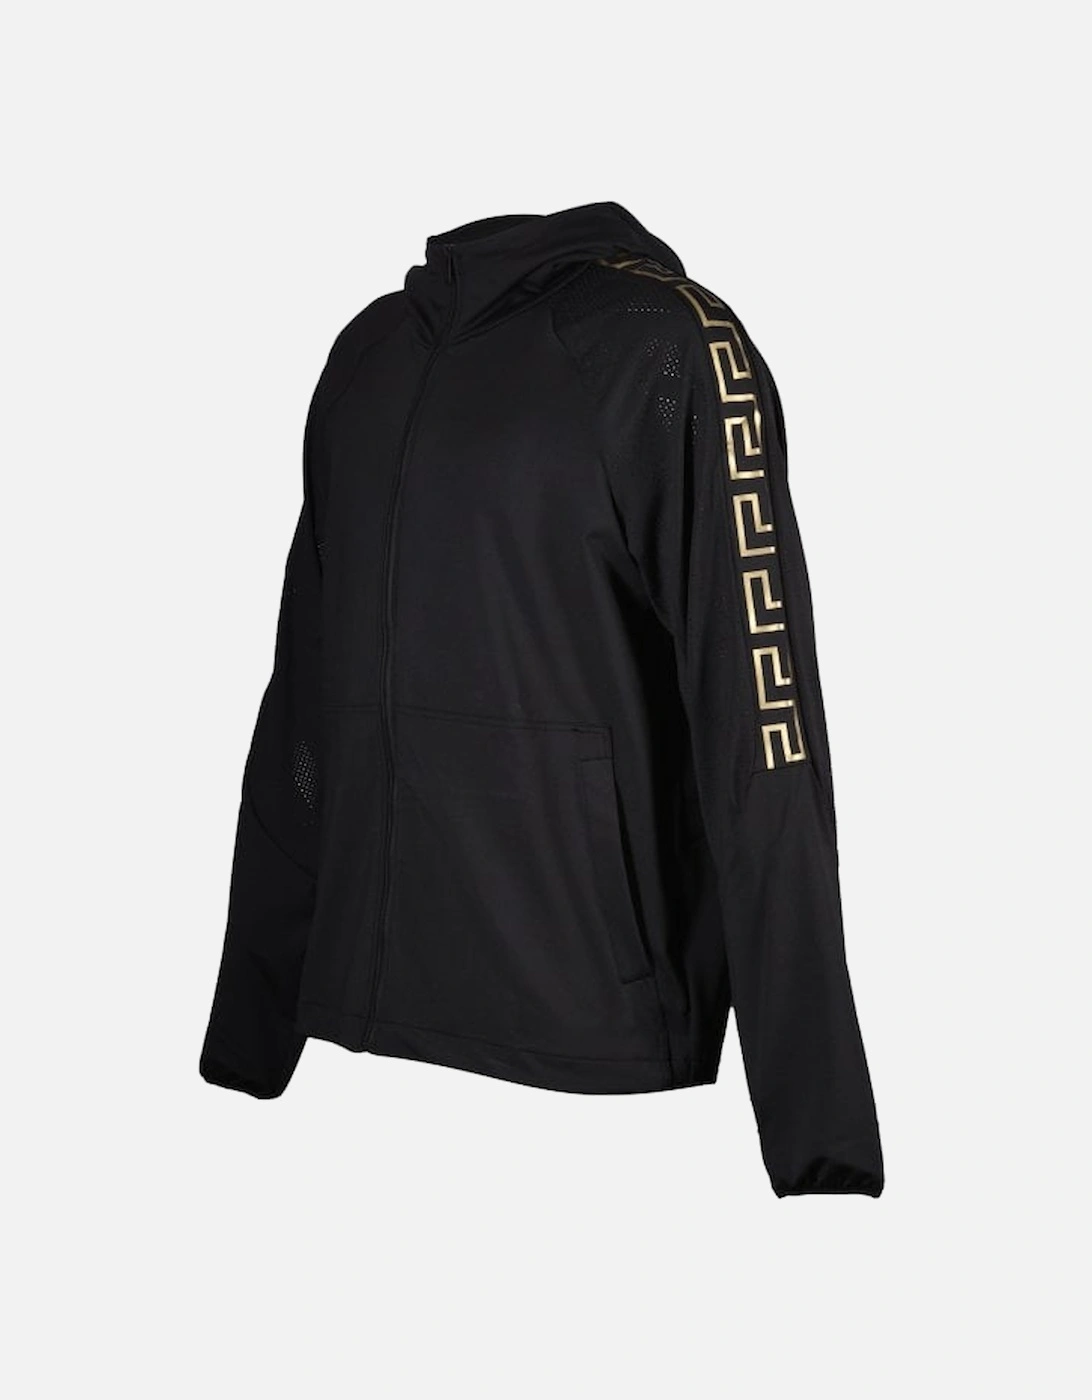 Iconic Logo Technical Gym Hoodie, Black/gold